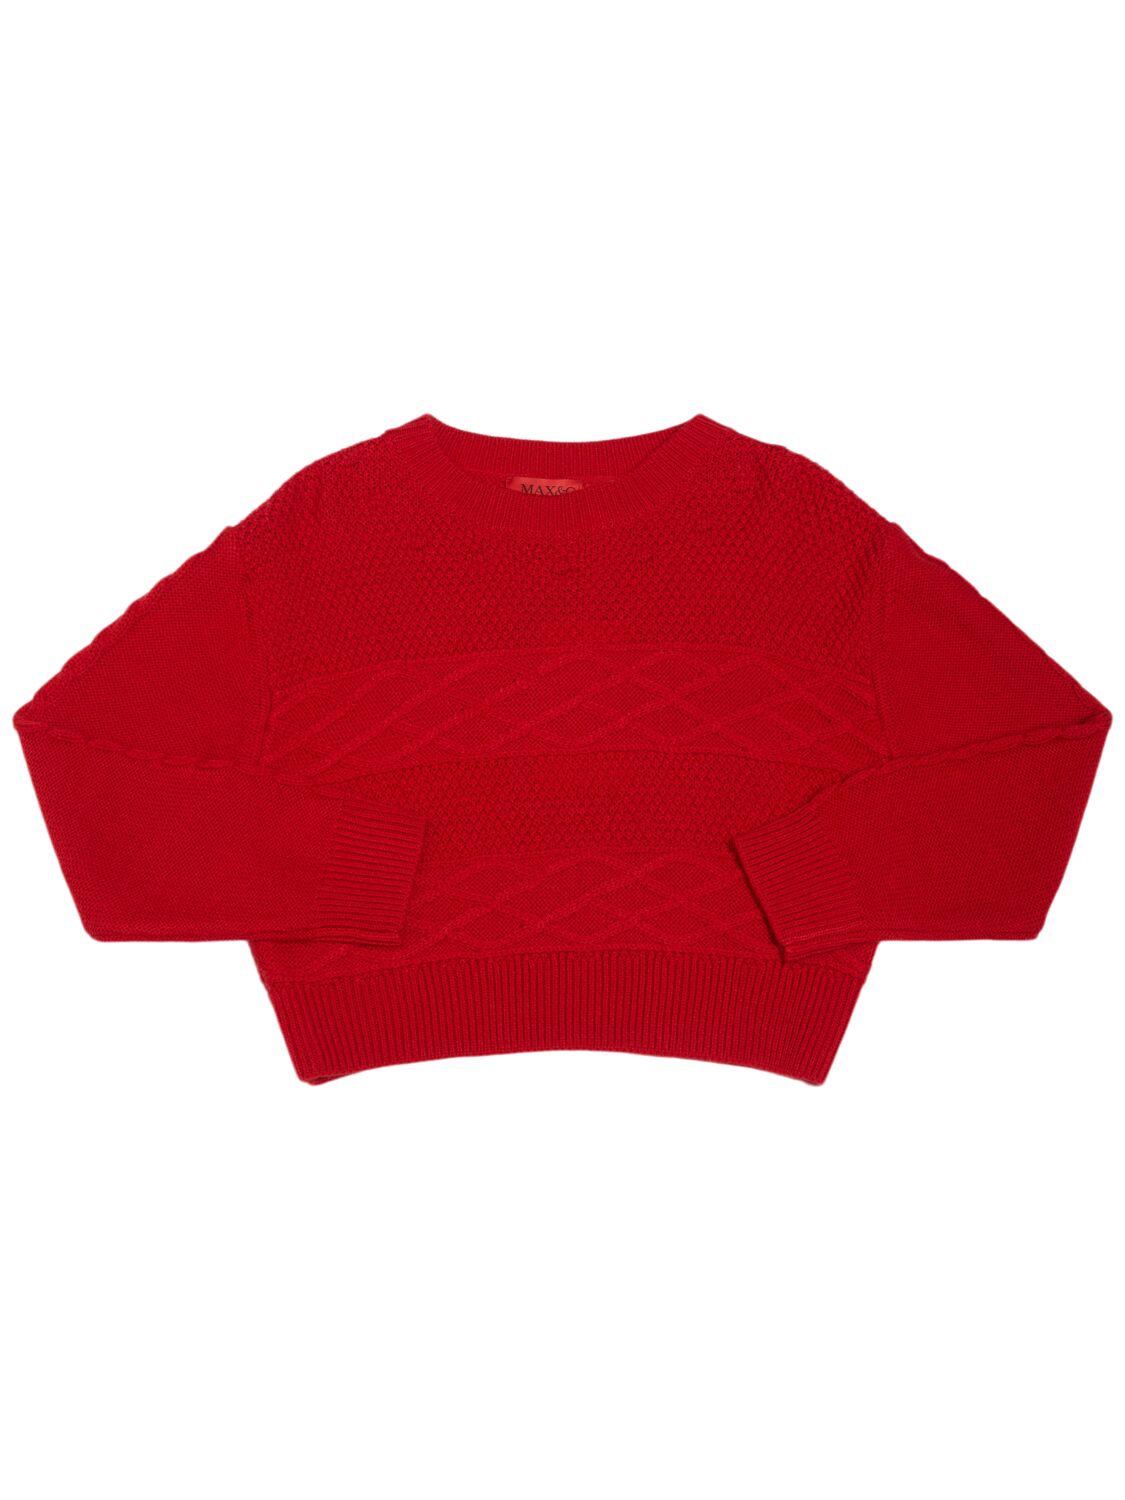 Max & Co Wool Blend Knit Sweater In Red